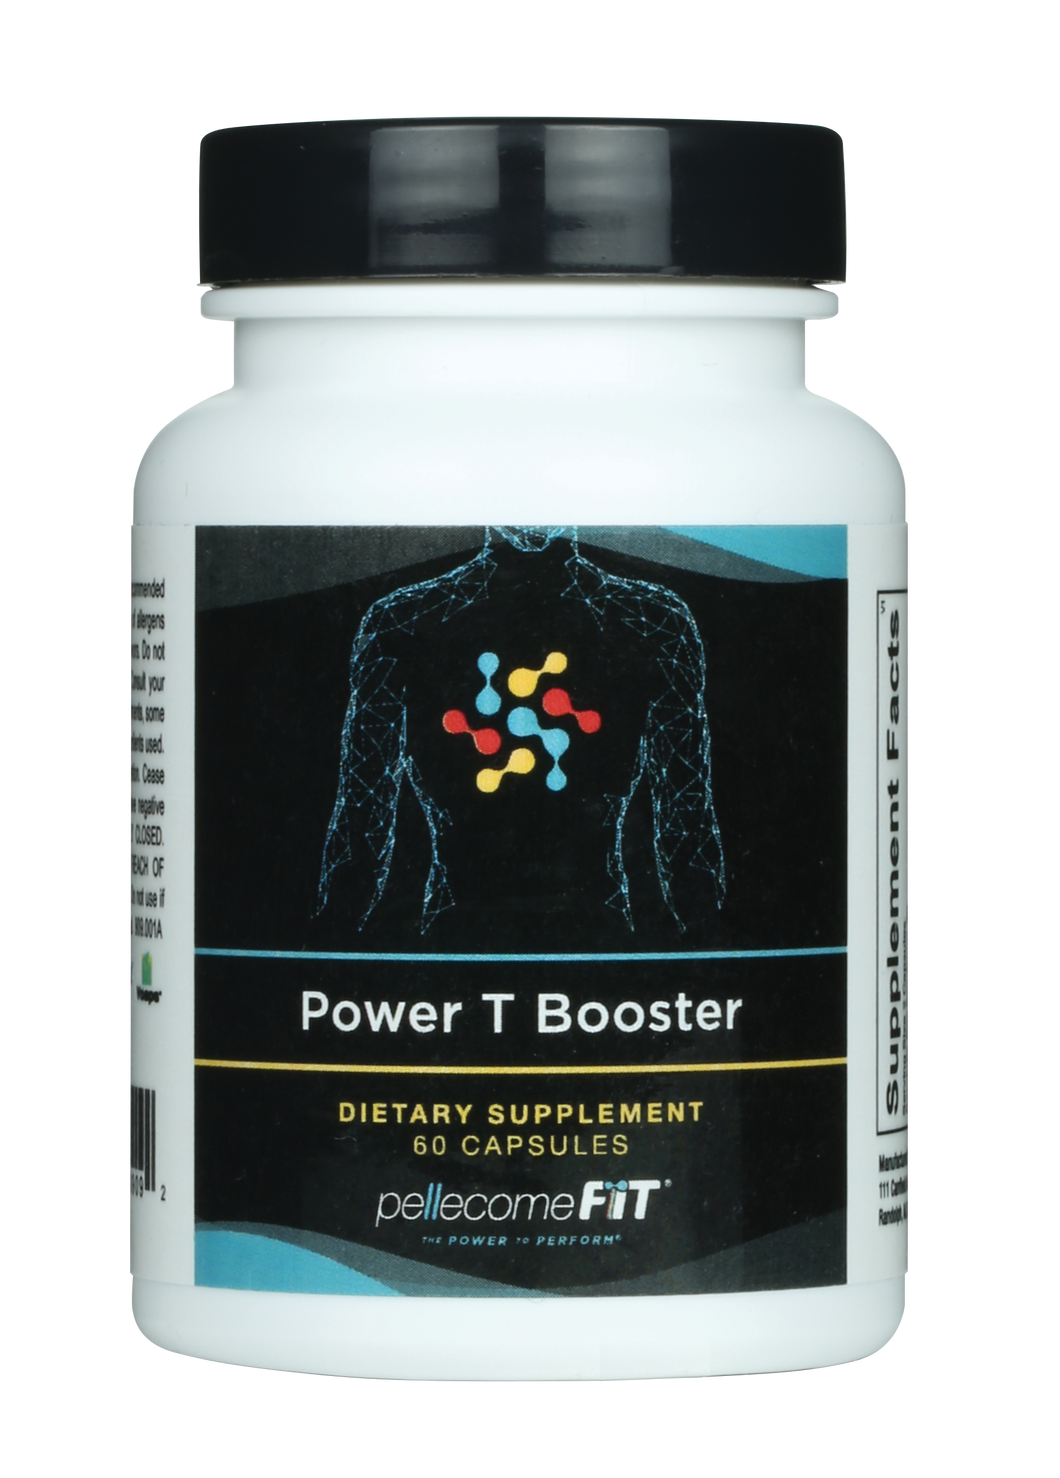 Power T Booster